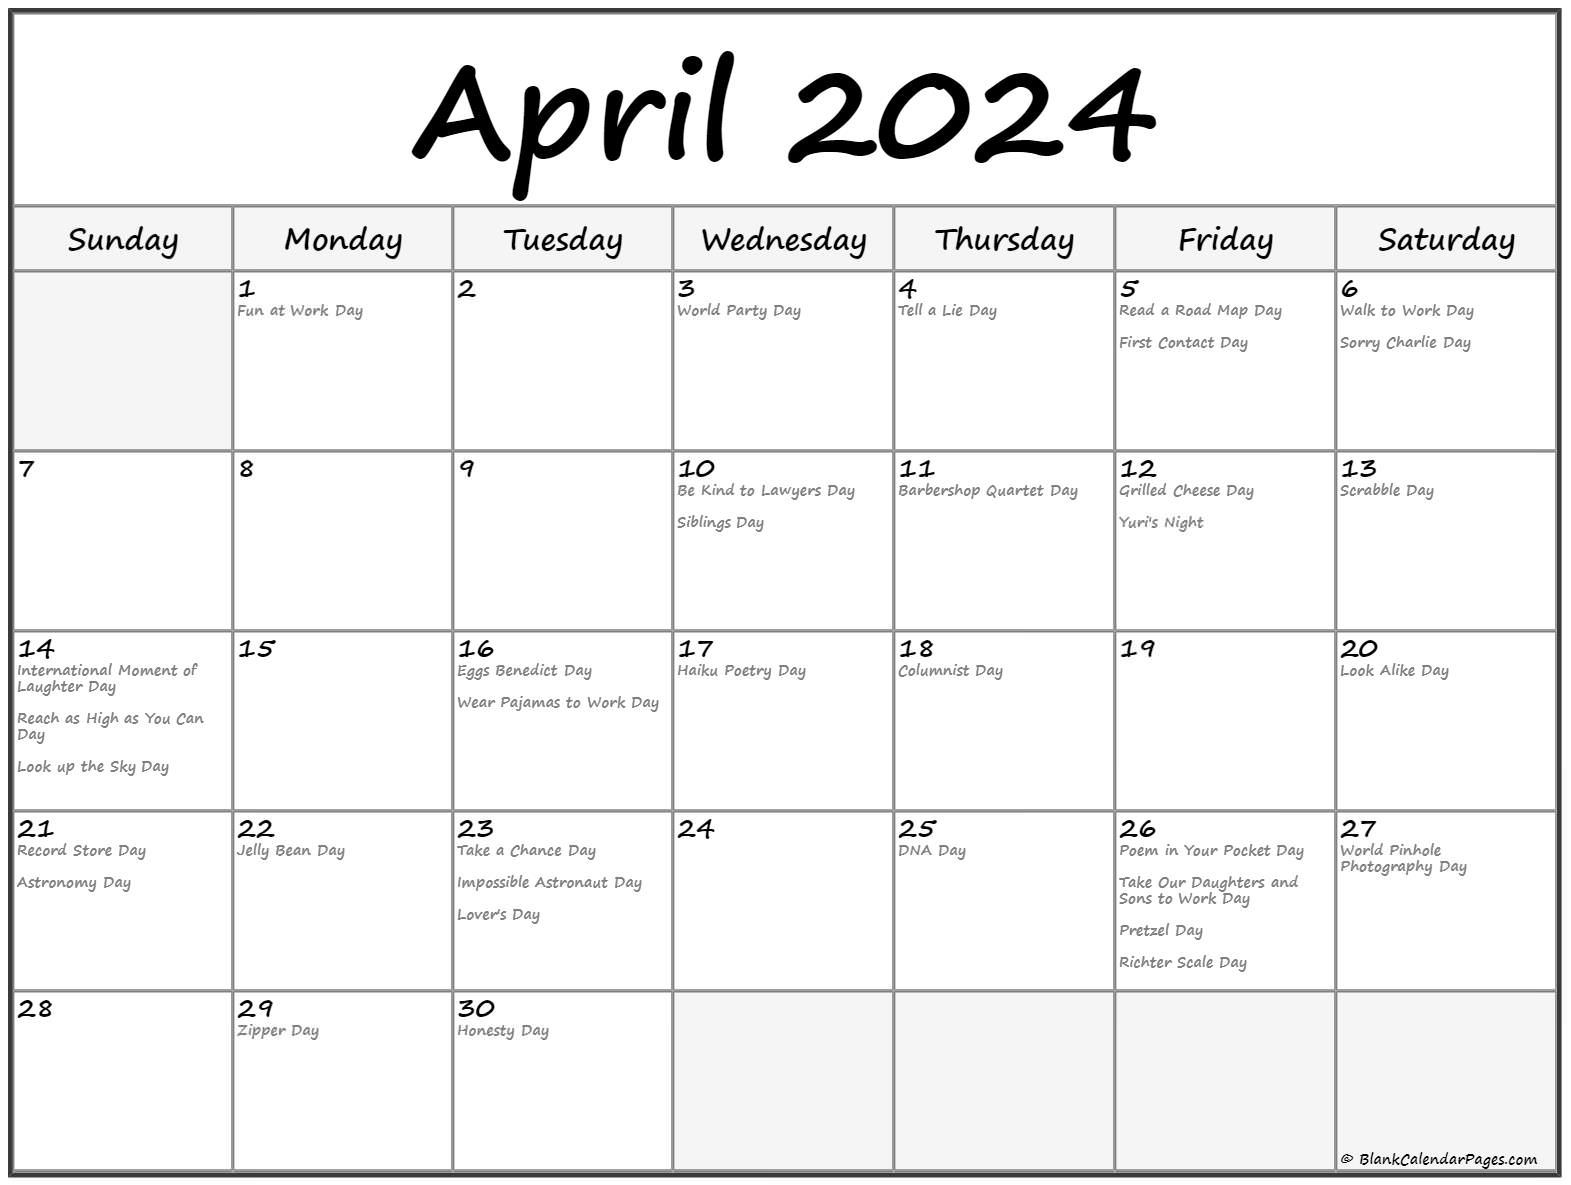 Collection of April 2021 calendars with holidays